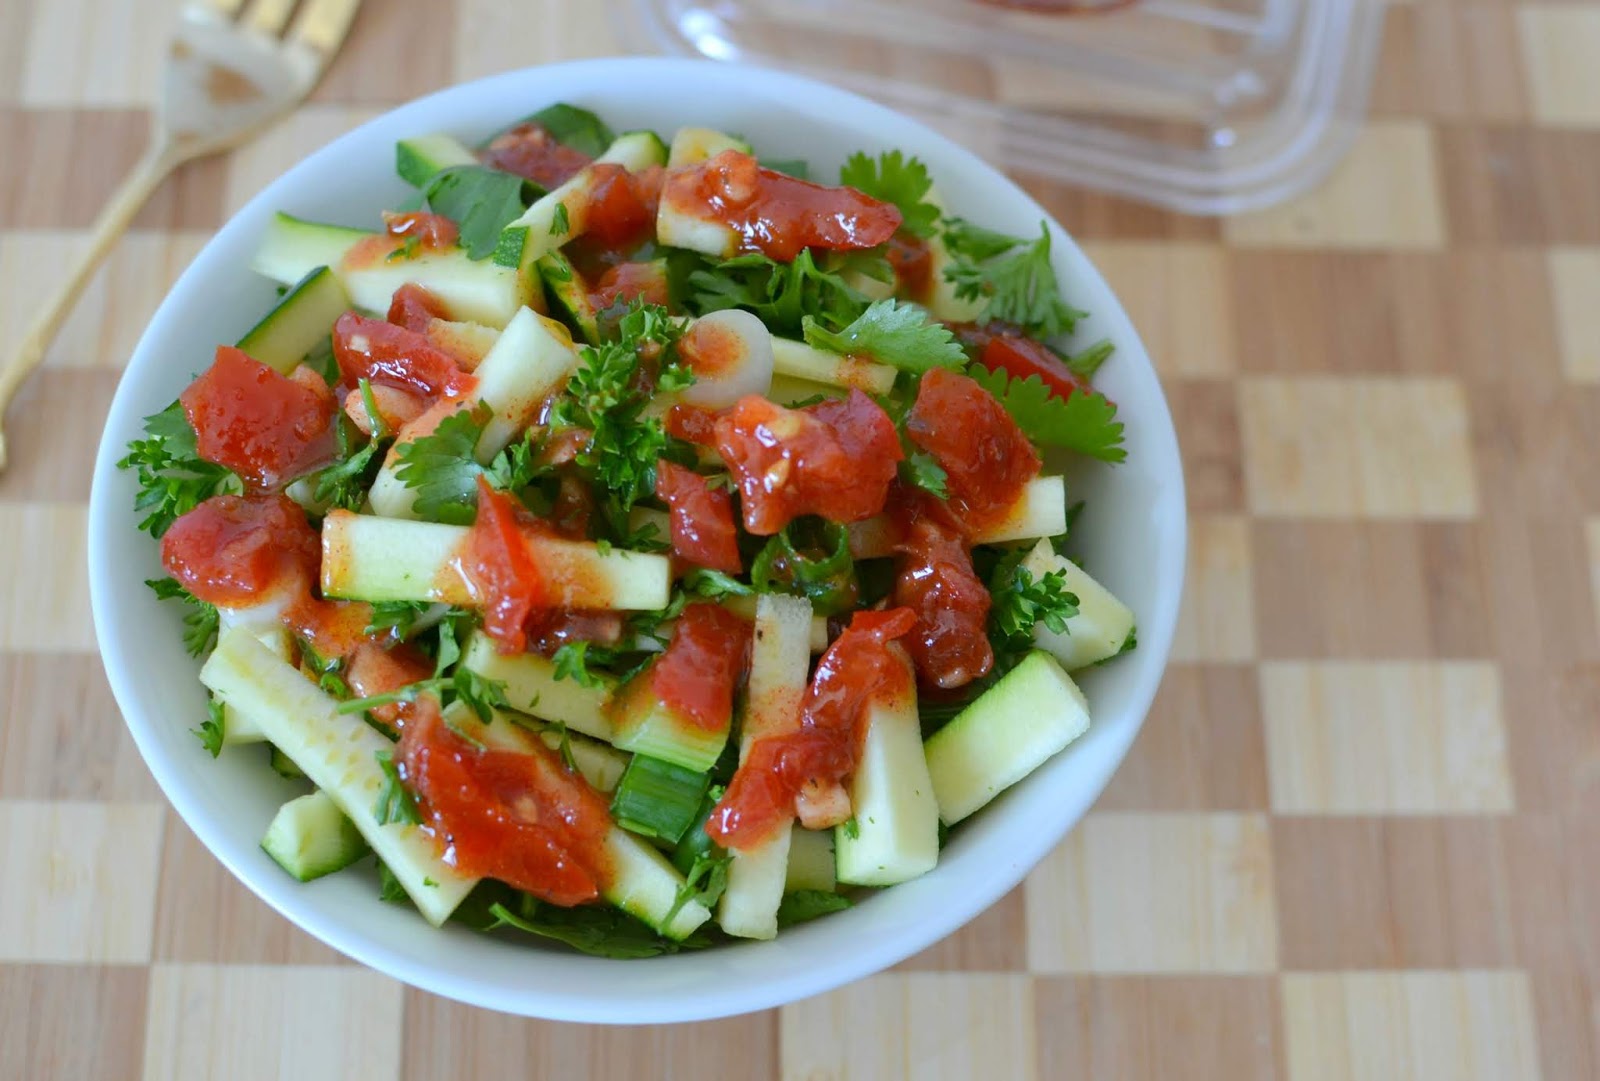 This summer tomato garlic salad dressing is perfect with lettuce salads, pasta salads and delicious drizzled over roasted vegetables! Skip the store bought stuff and make this instead!